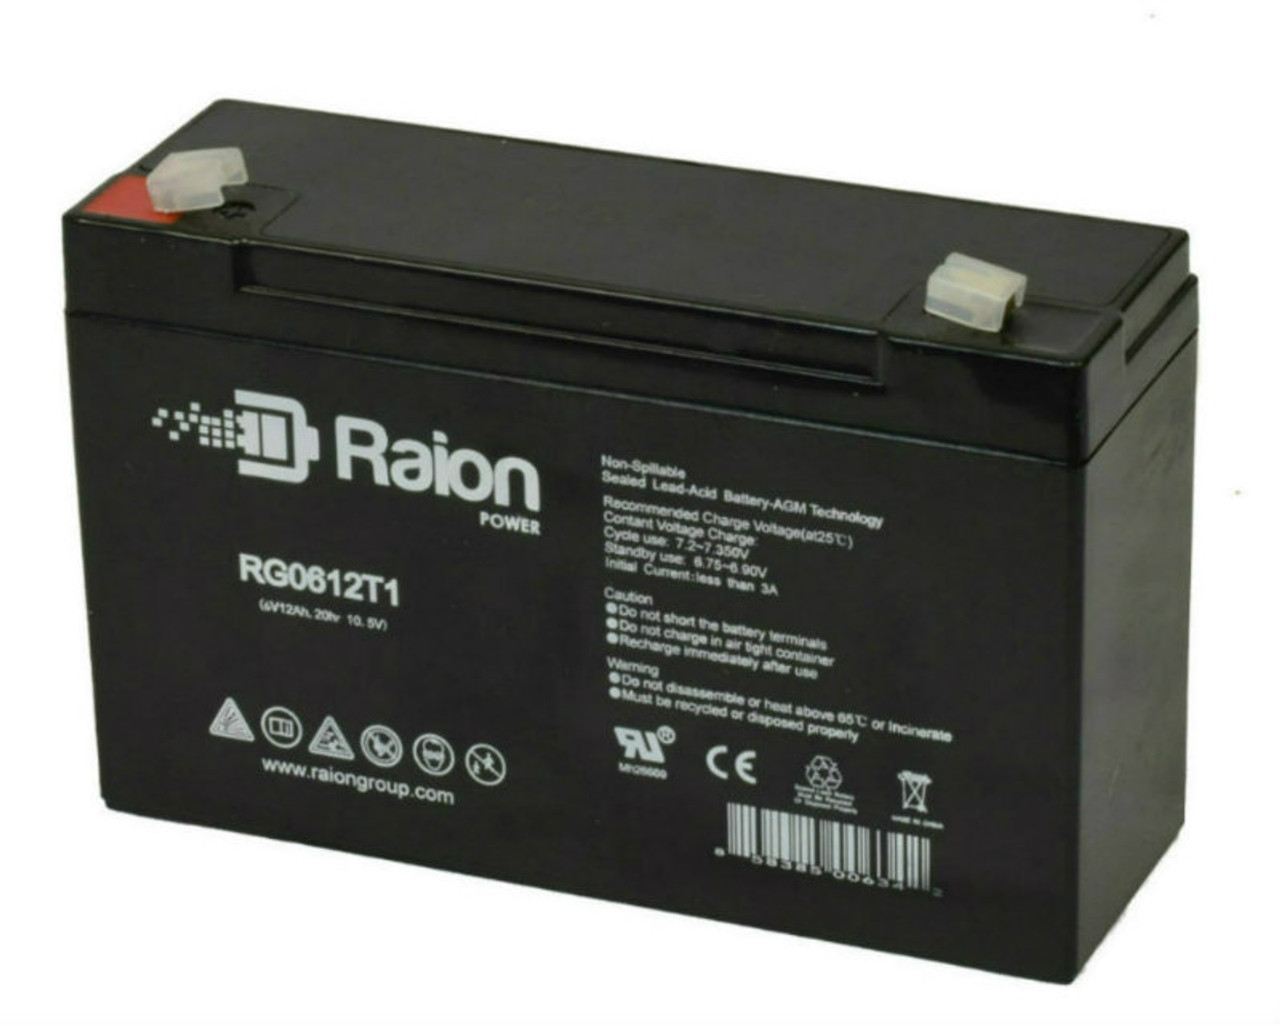 Raion Power RG06120T1 Replacement Battery for SBB 3FM12